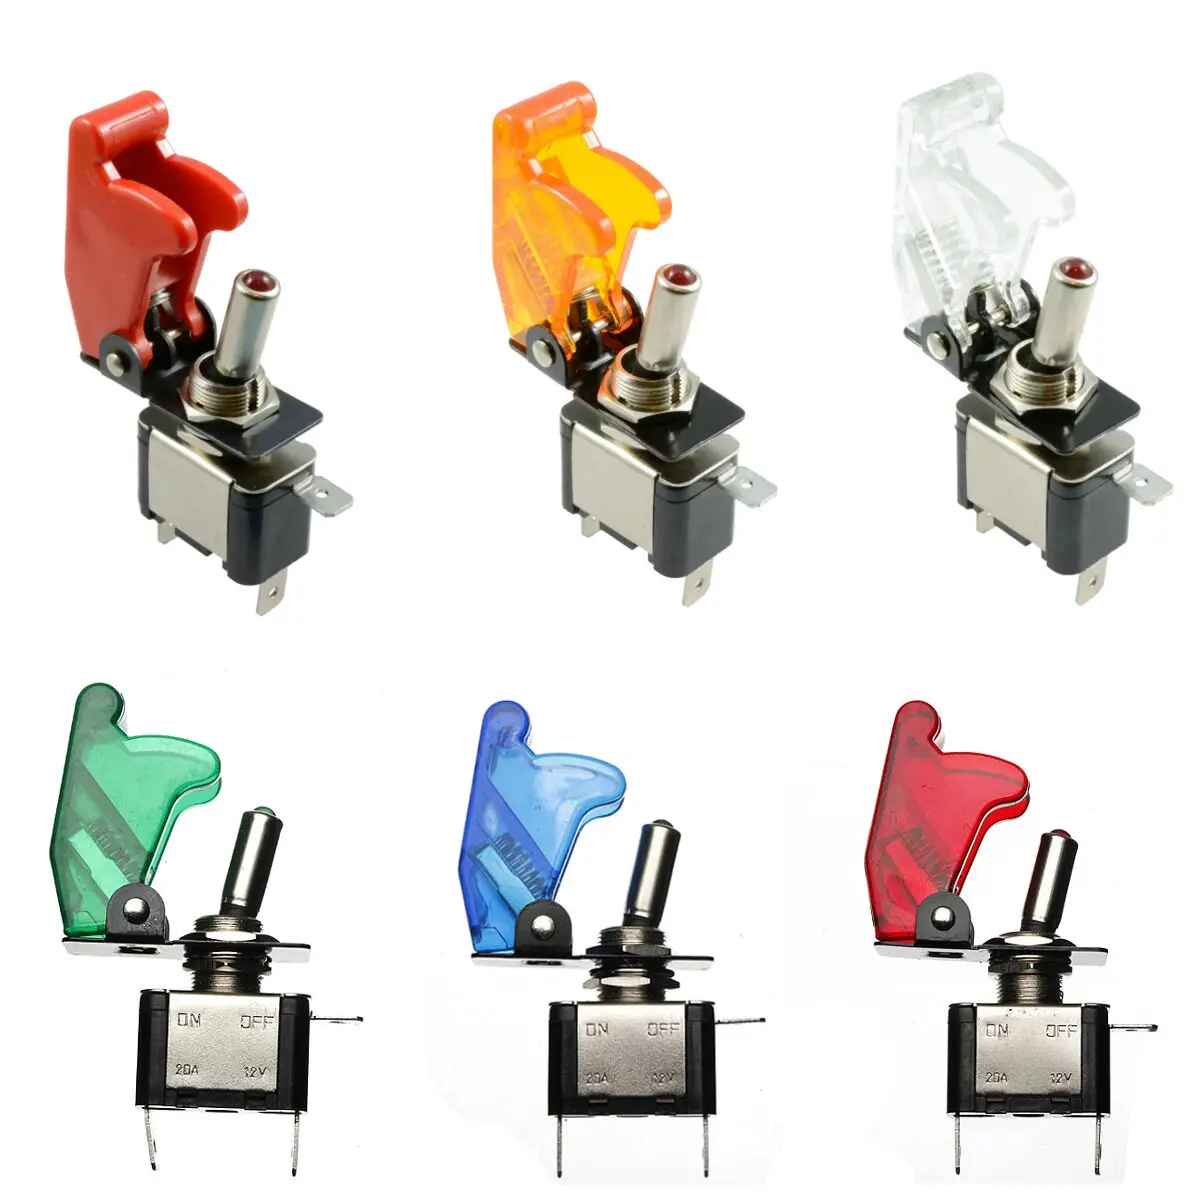 

12V 20A Auto Car Boat Truck Illuminated Led Toggle Switch Control On/Off With Safety Aircraft Flip Up Cover Guard 6 color